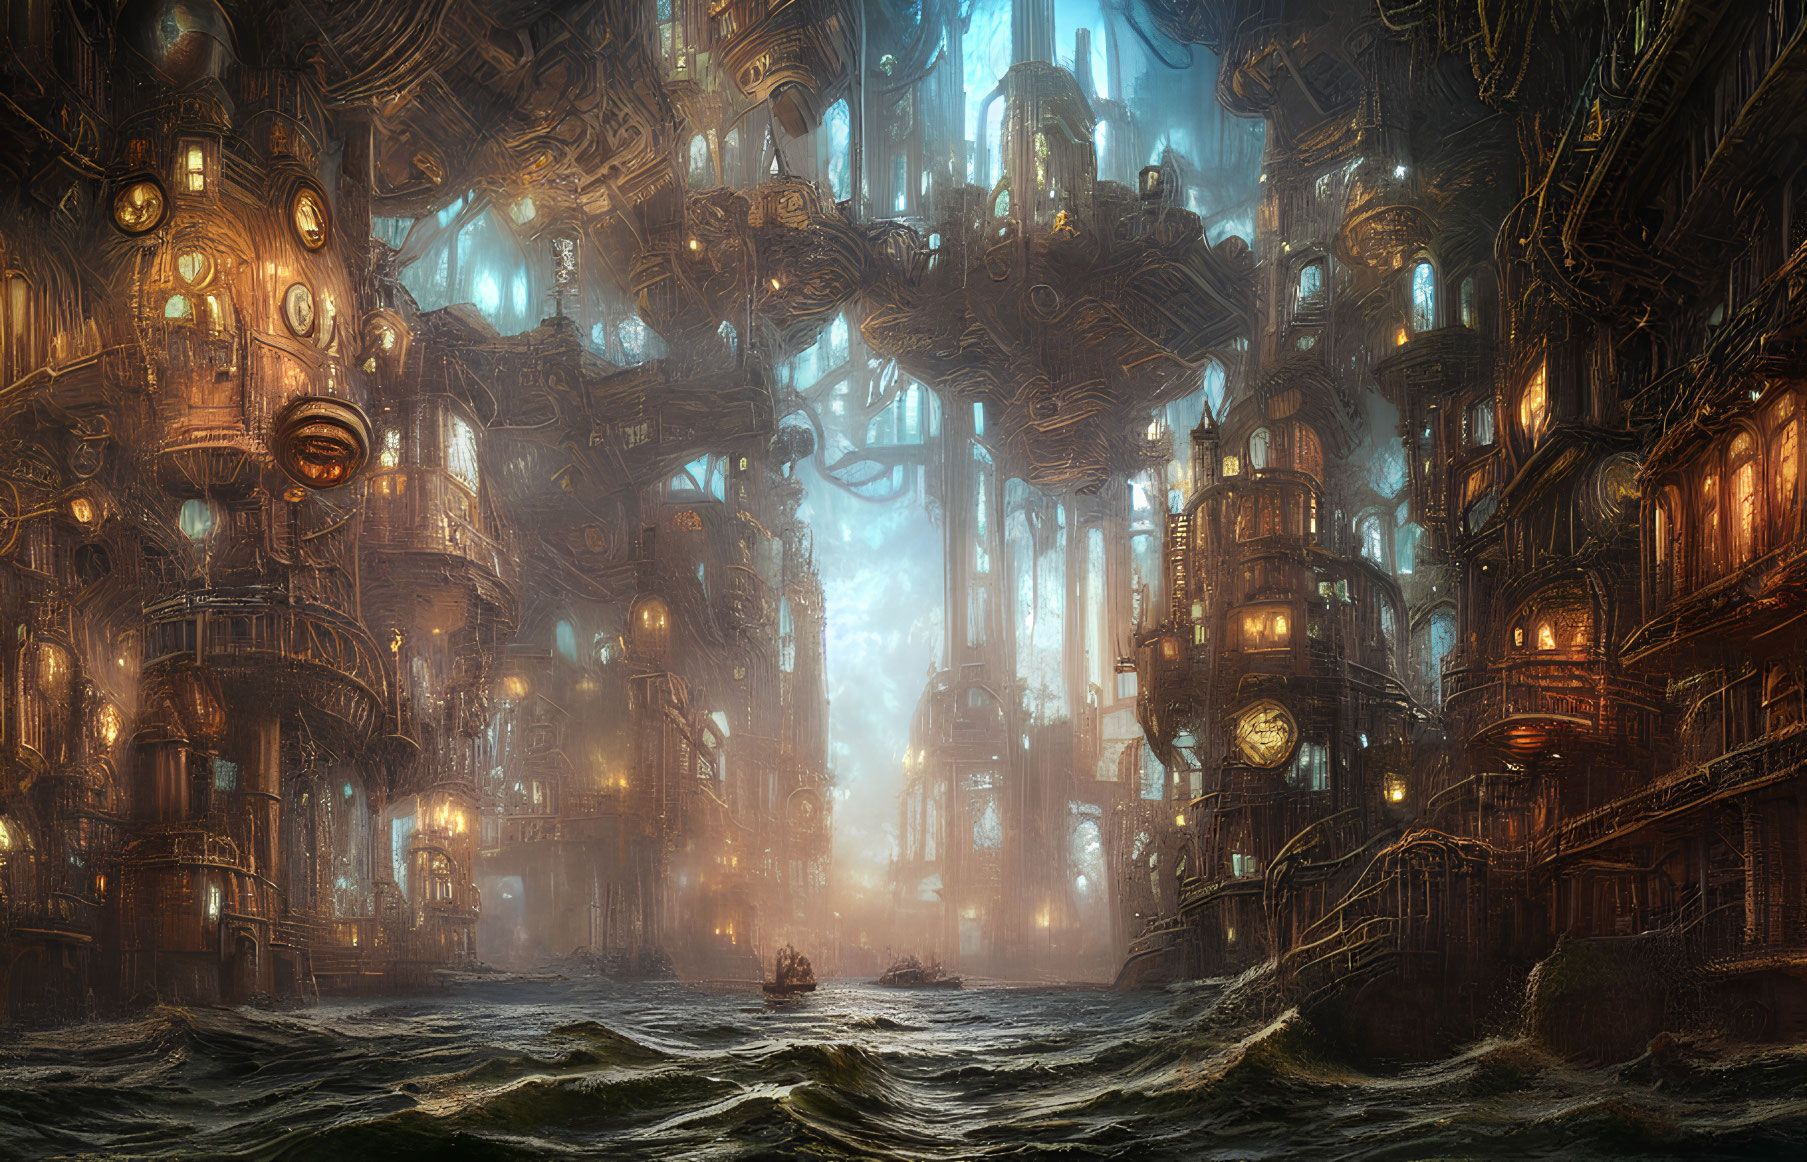 Intricate Steampunk Cityscape Emerging from Turbulent Waters